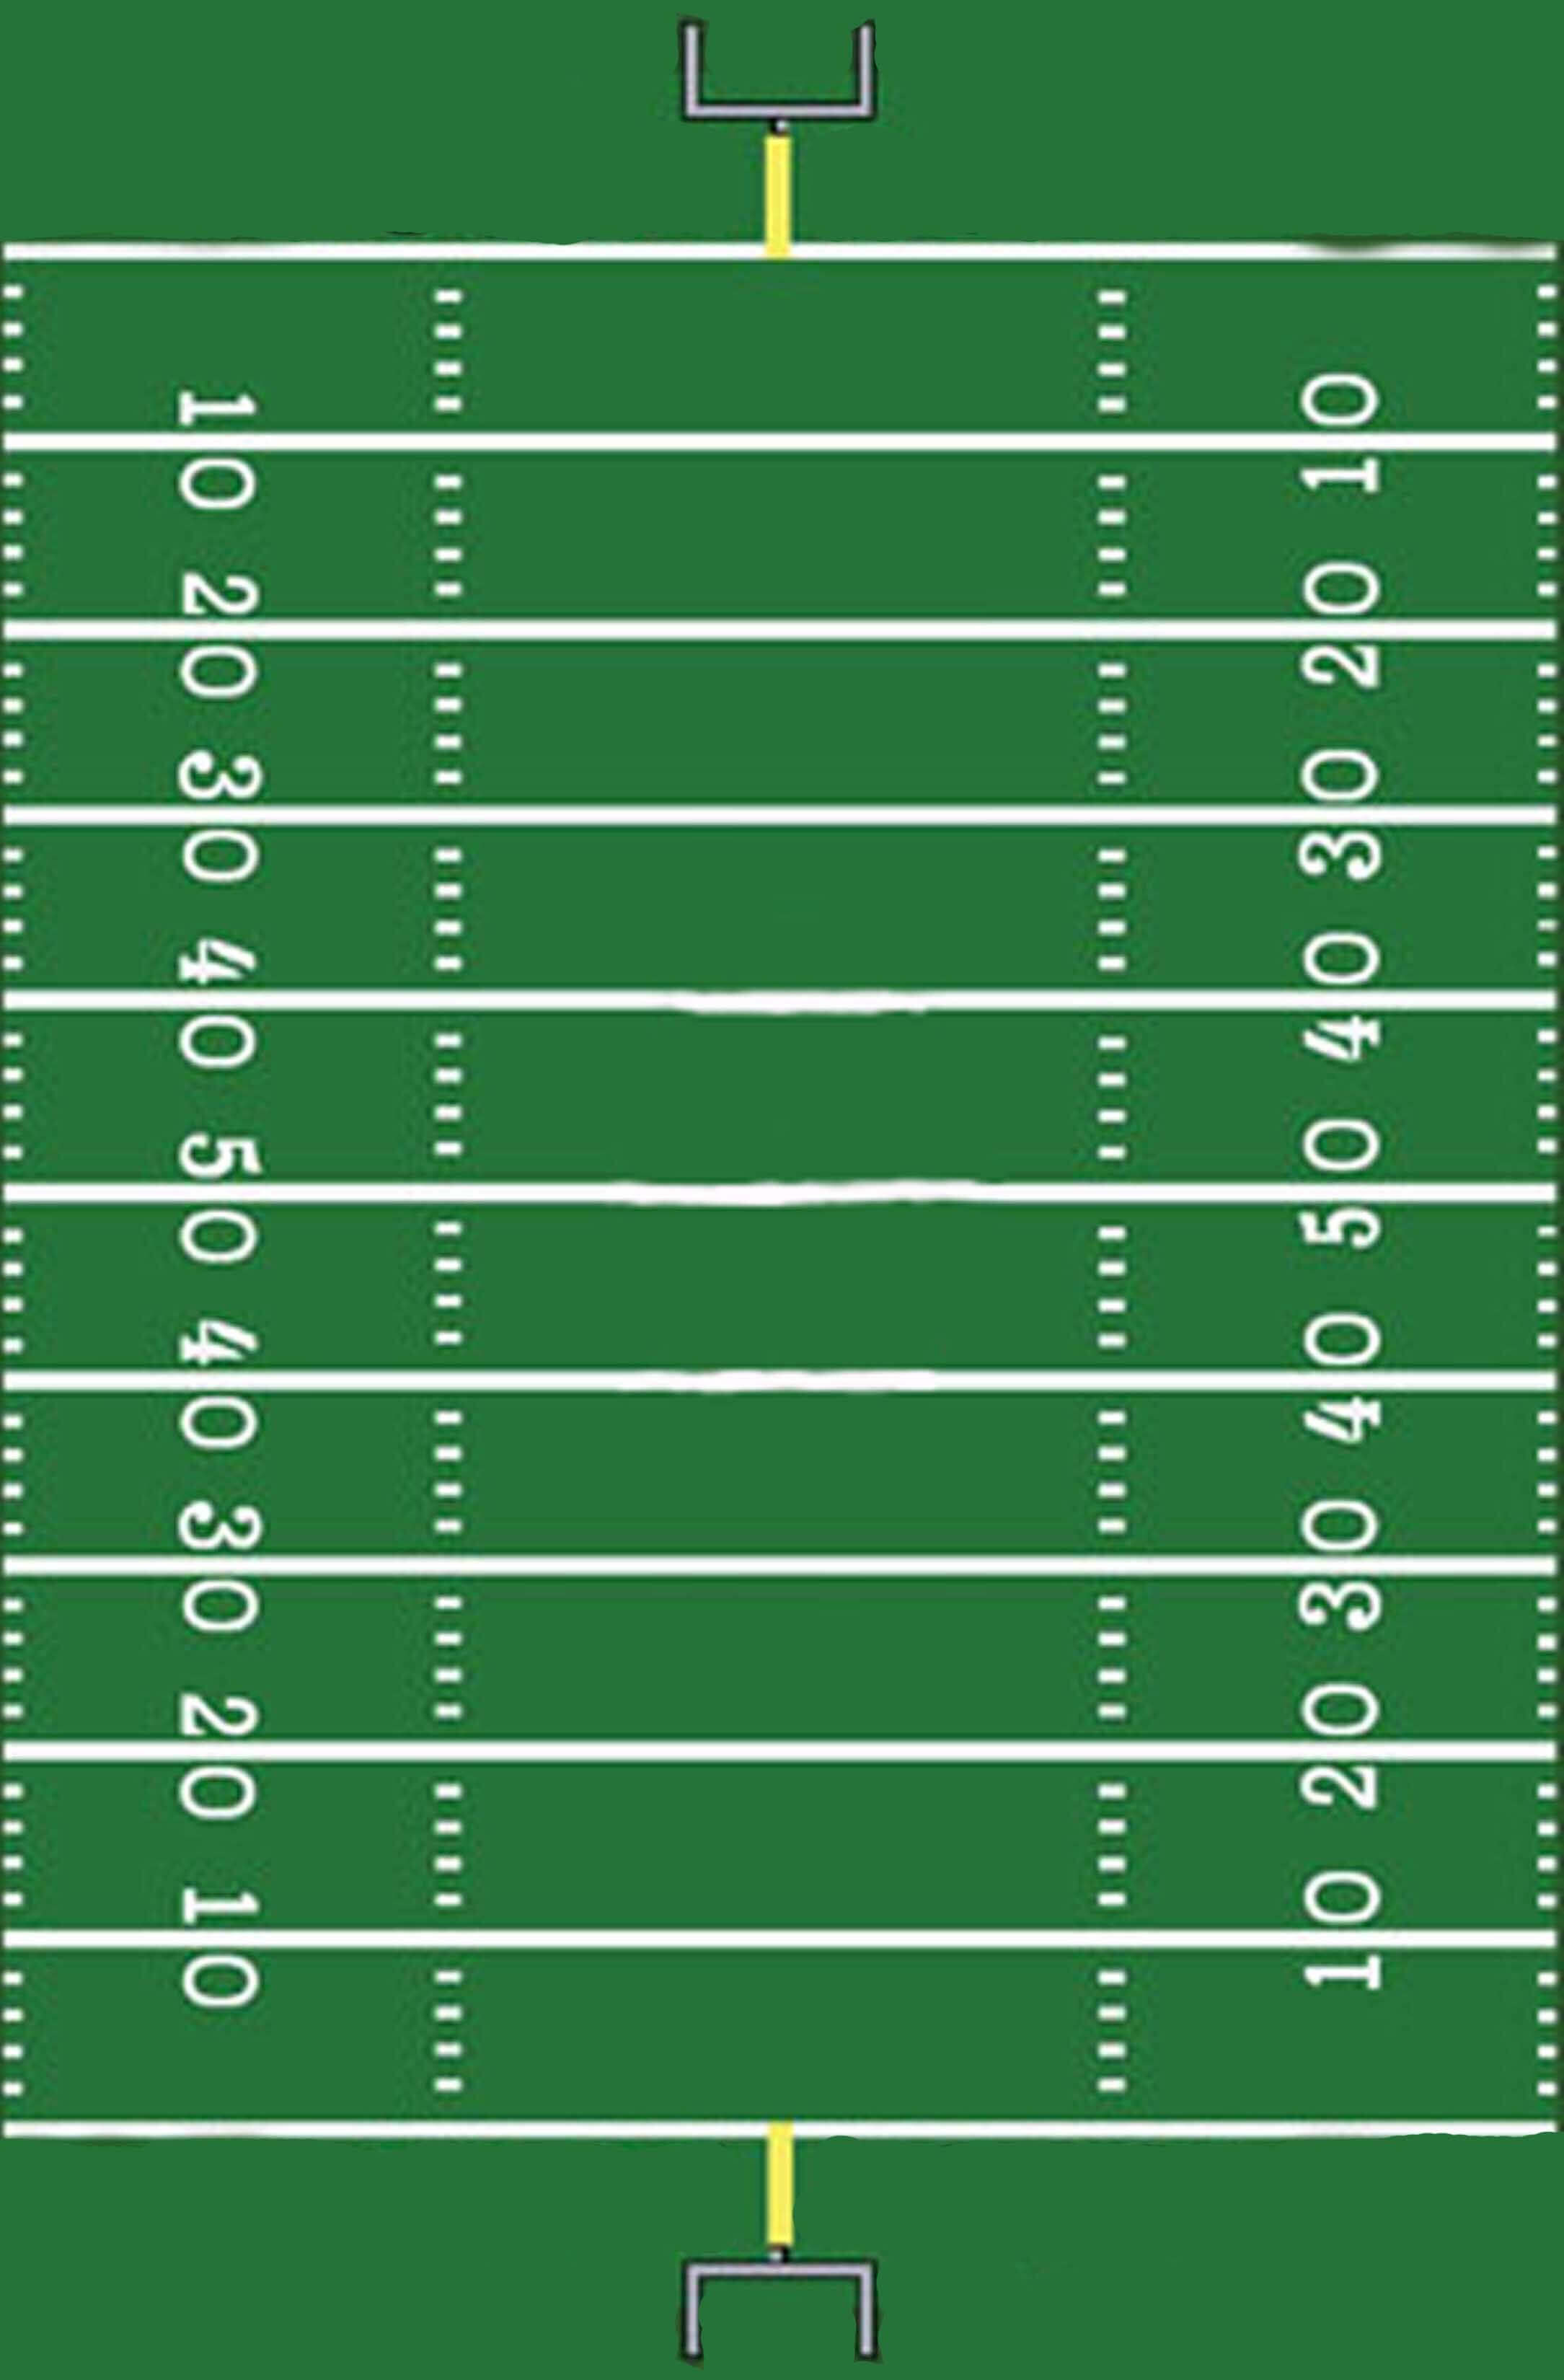 Football Field Template I Made For A Sign | Football Field In Blank Football Field Template